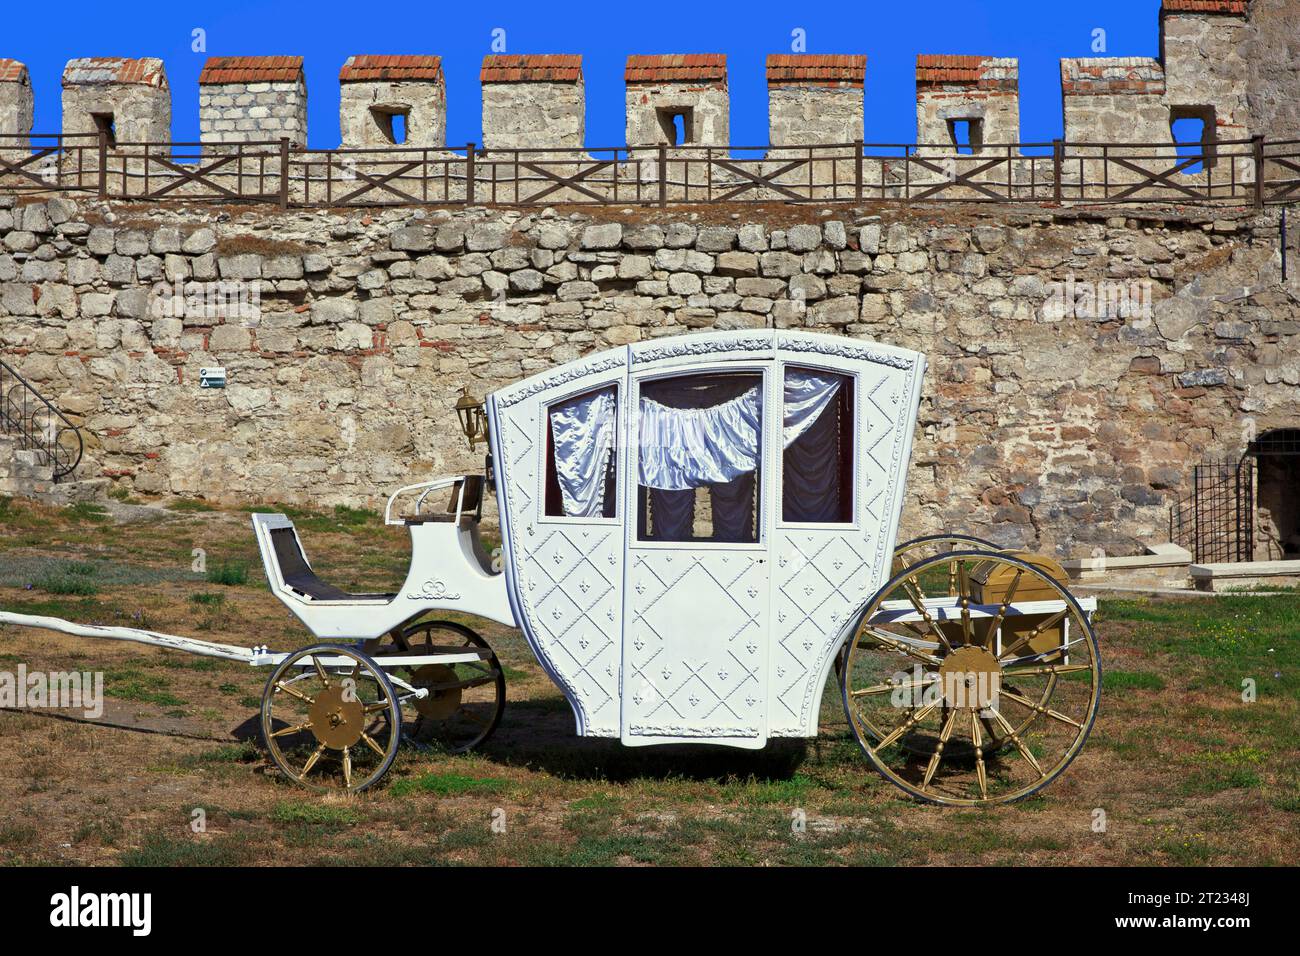 A white fairy tale-like carriage at the 15th century Tighina Fortress in Bender (Transnistria), Moldova Stock Photo